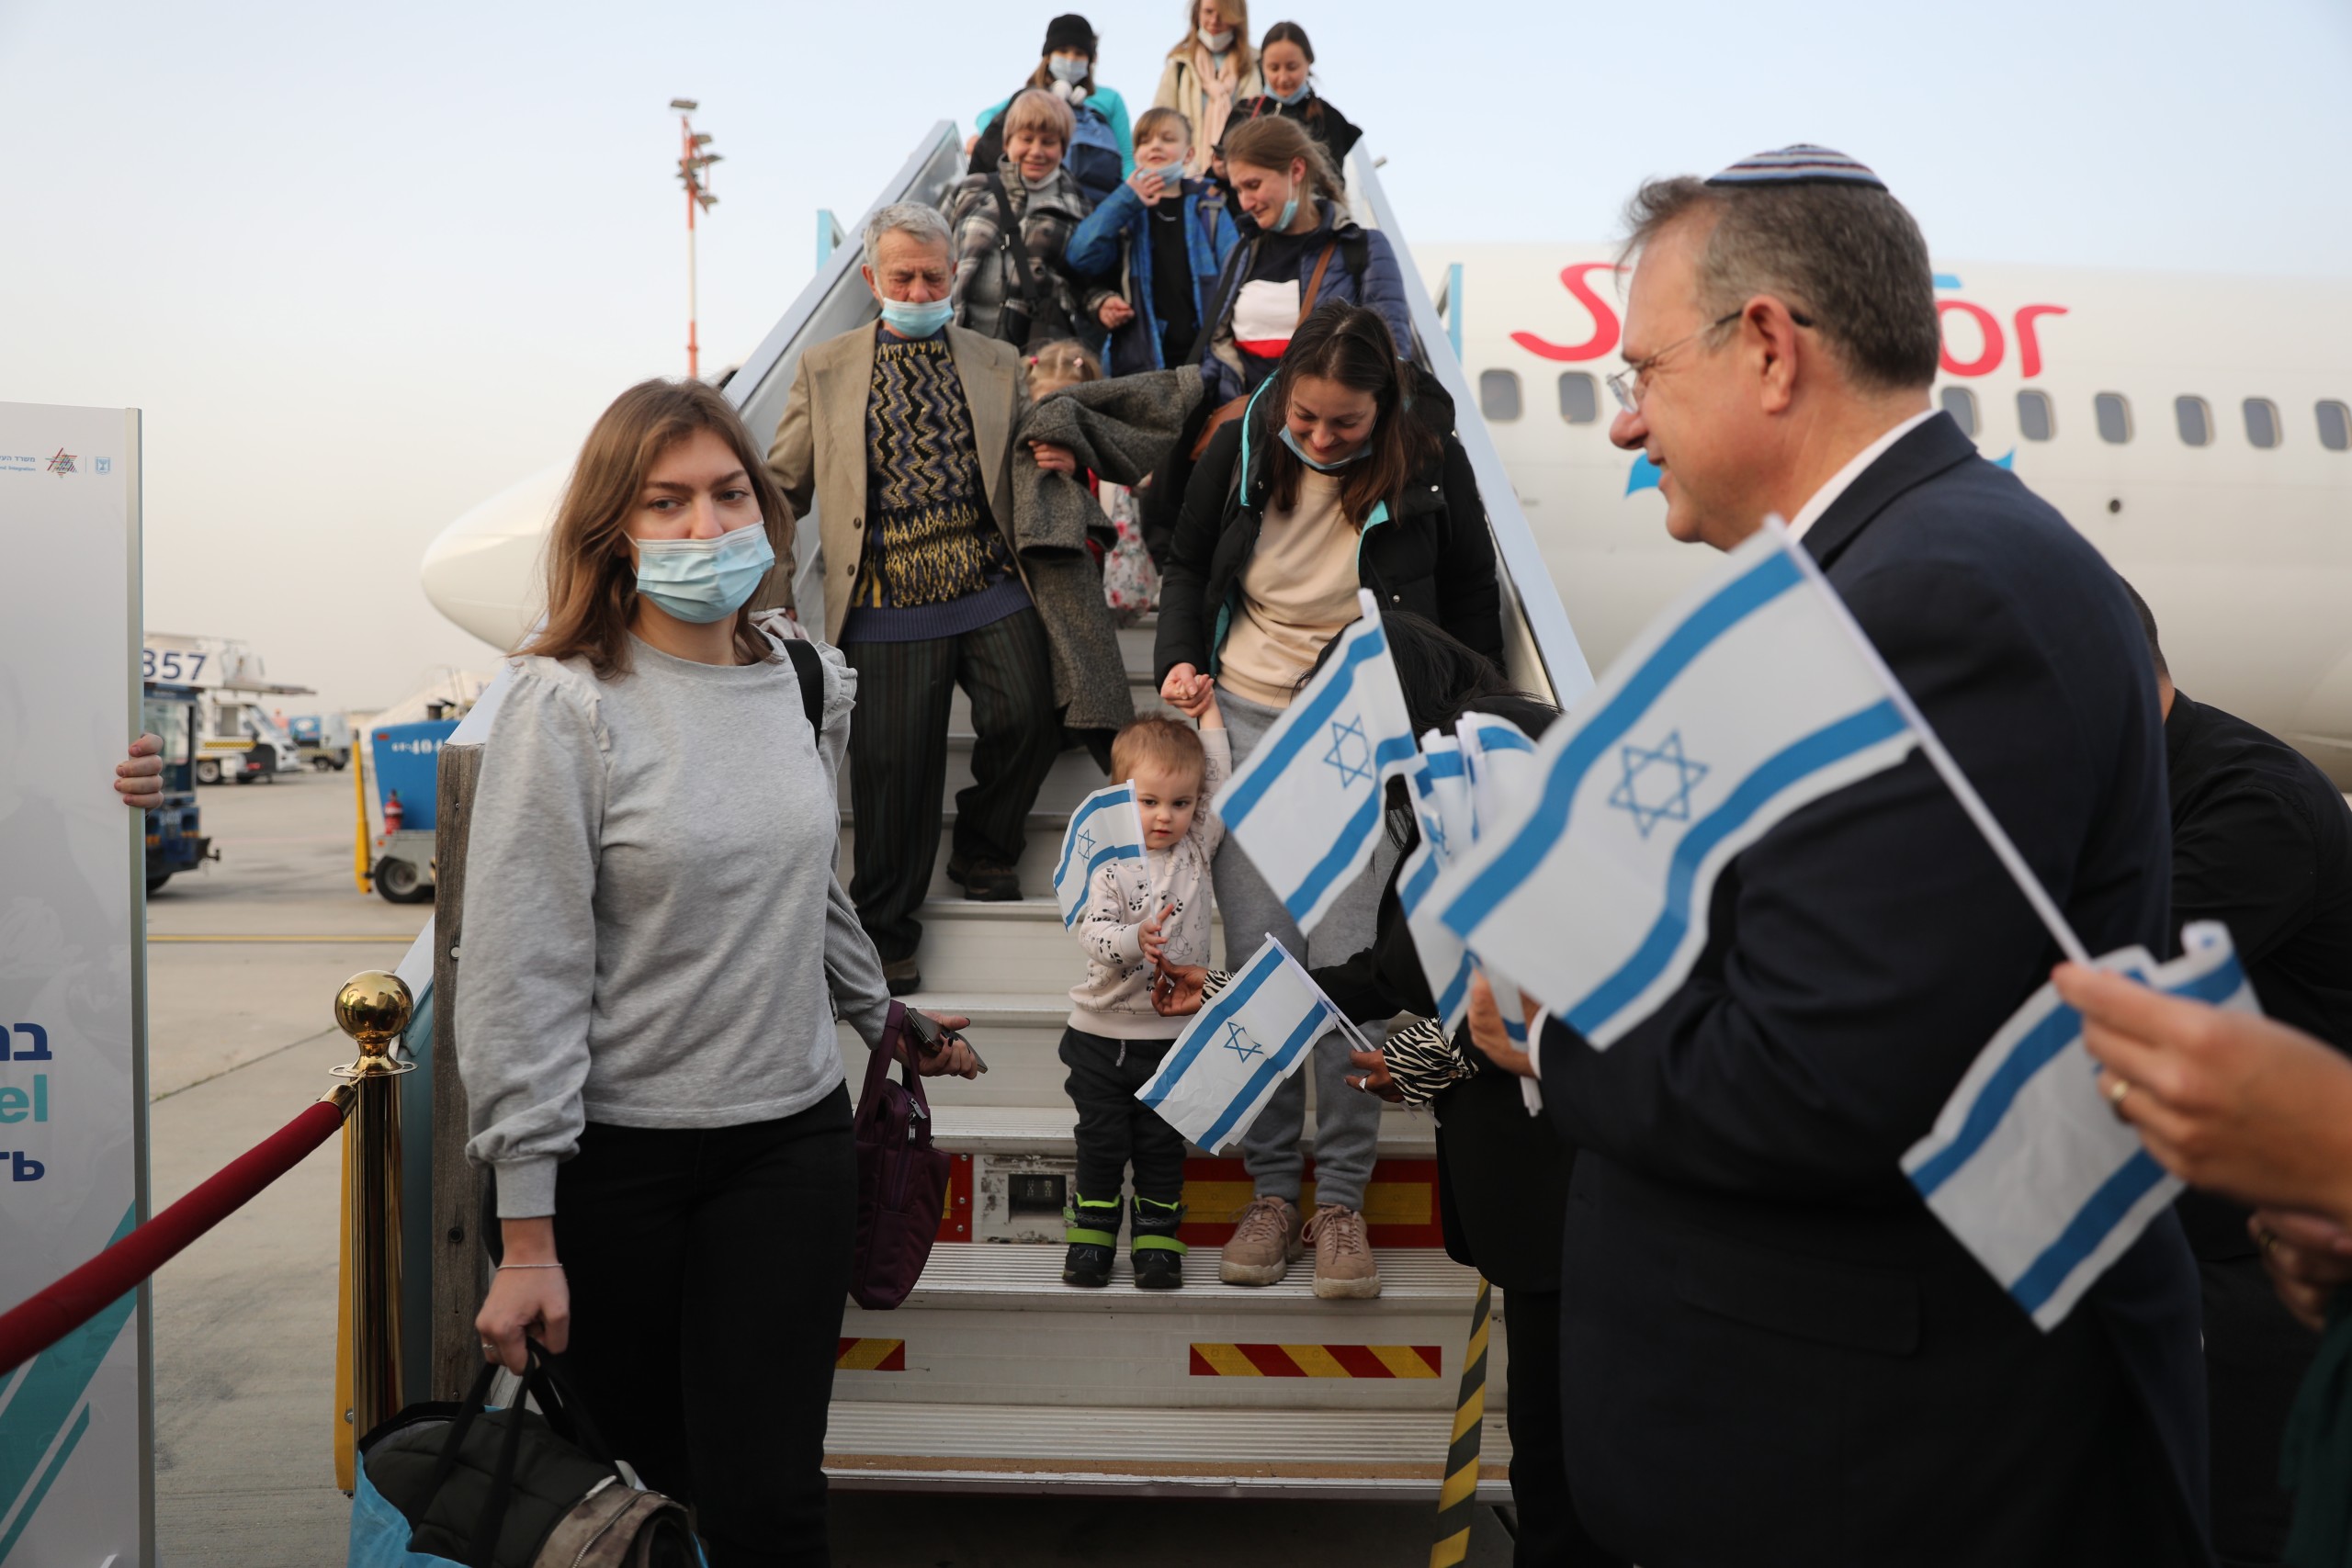 epa09805772 Ukrainian Jews disembark a plane arriving at Ben Gurion international airport near Tel Aviv, Israel, 06 March 2022. Three flights carrying around 300 Ukrainian Jews arrived from Poland and Moldova on 06 March as part of an operation organized by the Israeli government and Jewish Agency to allow Jewish immigrants fleeing the war in Ukraine into Israel amid estimates that some 10,000 people will arrive in the coming weeks.  EPA/ABIR SULTAN